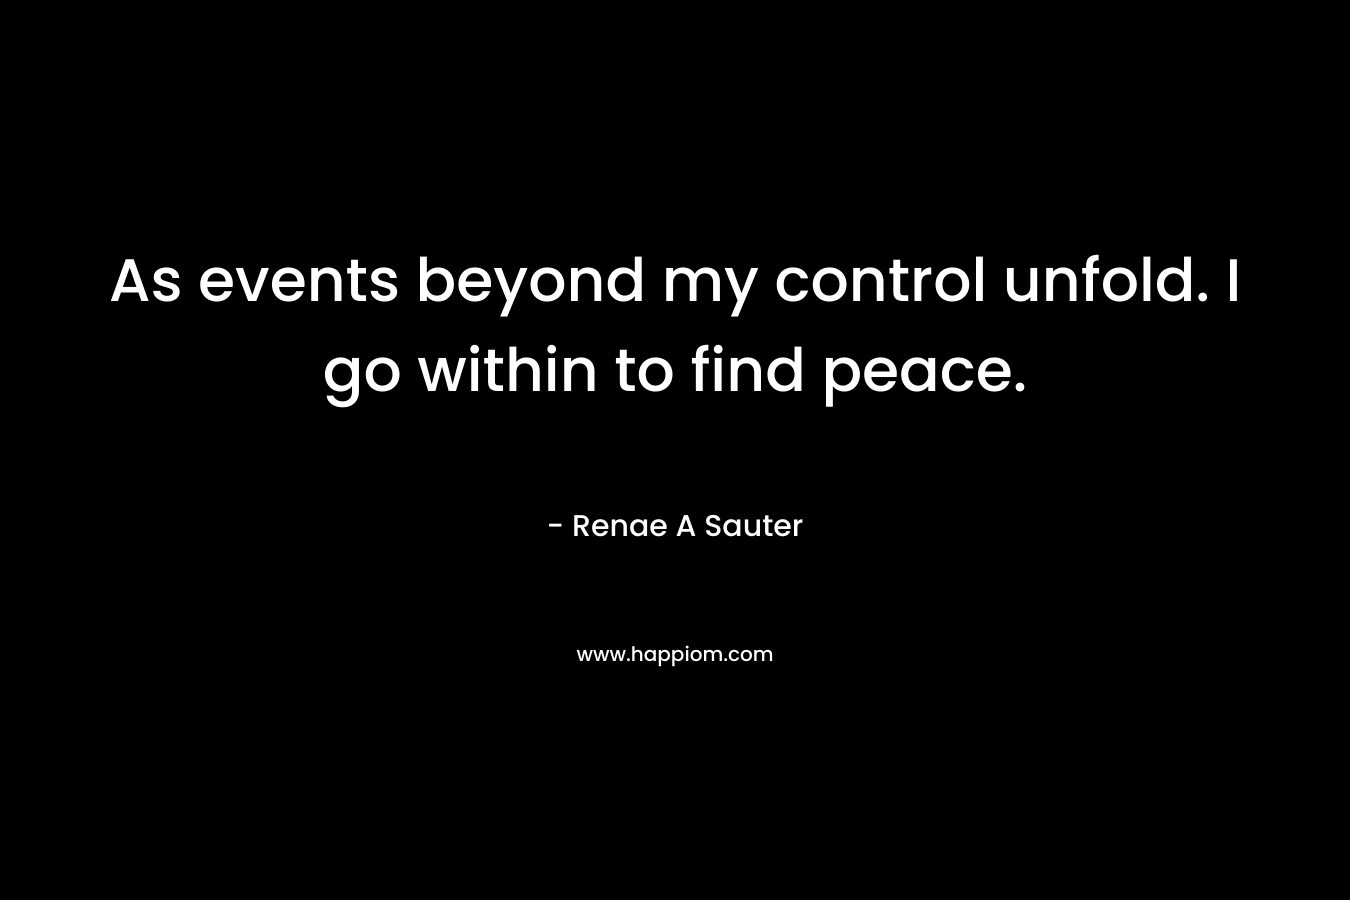 As events beyond my control unfold. I go within to find peace.